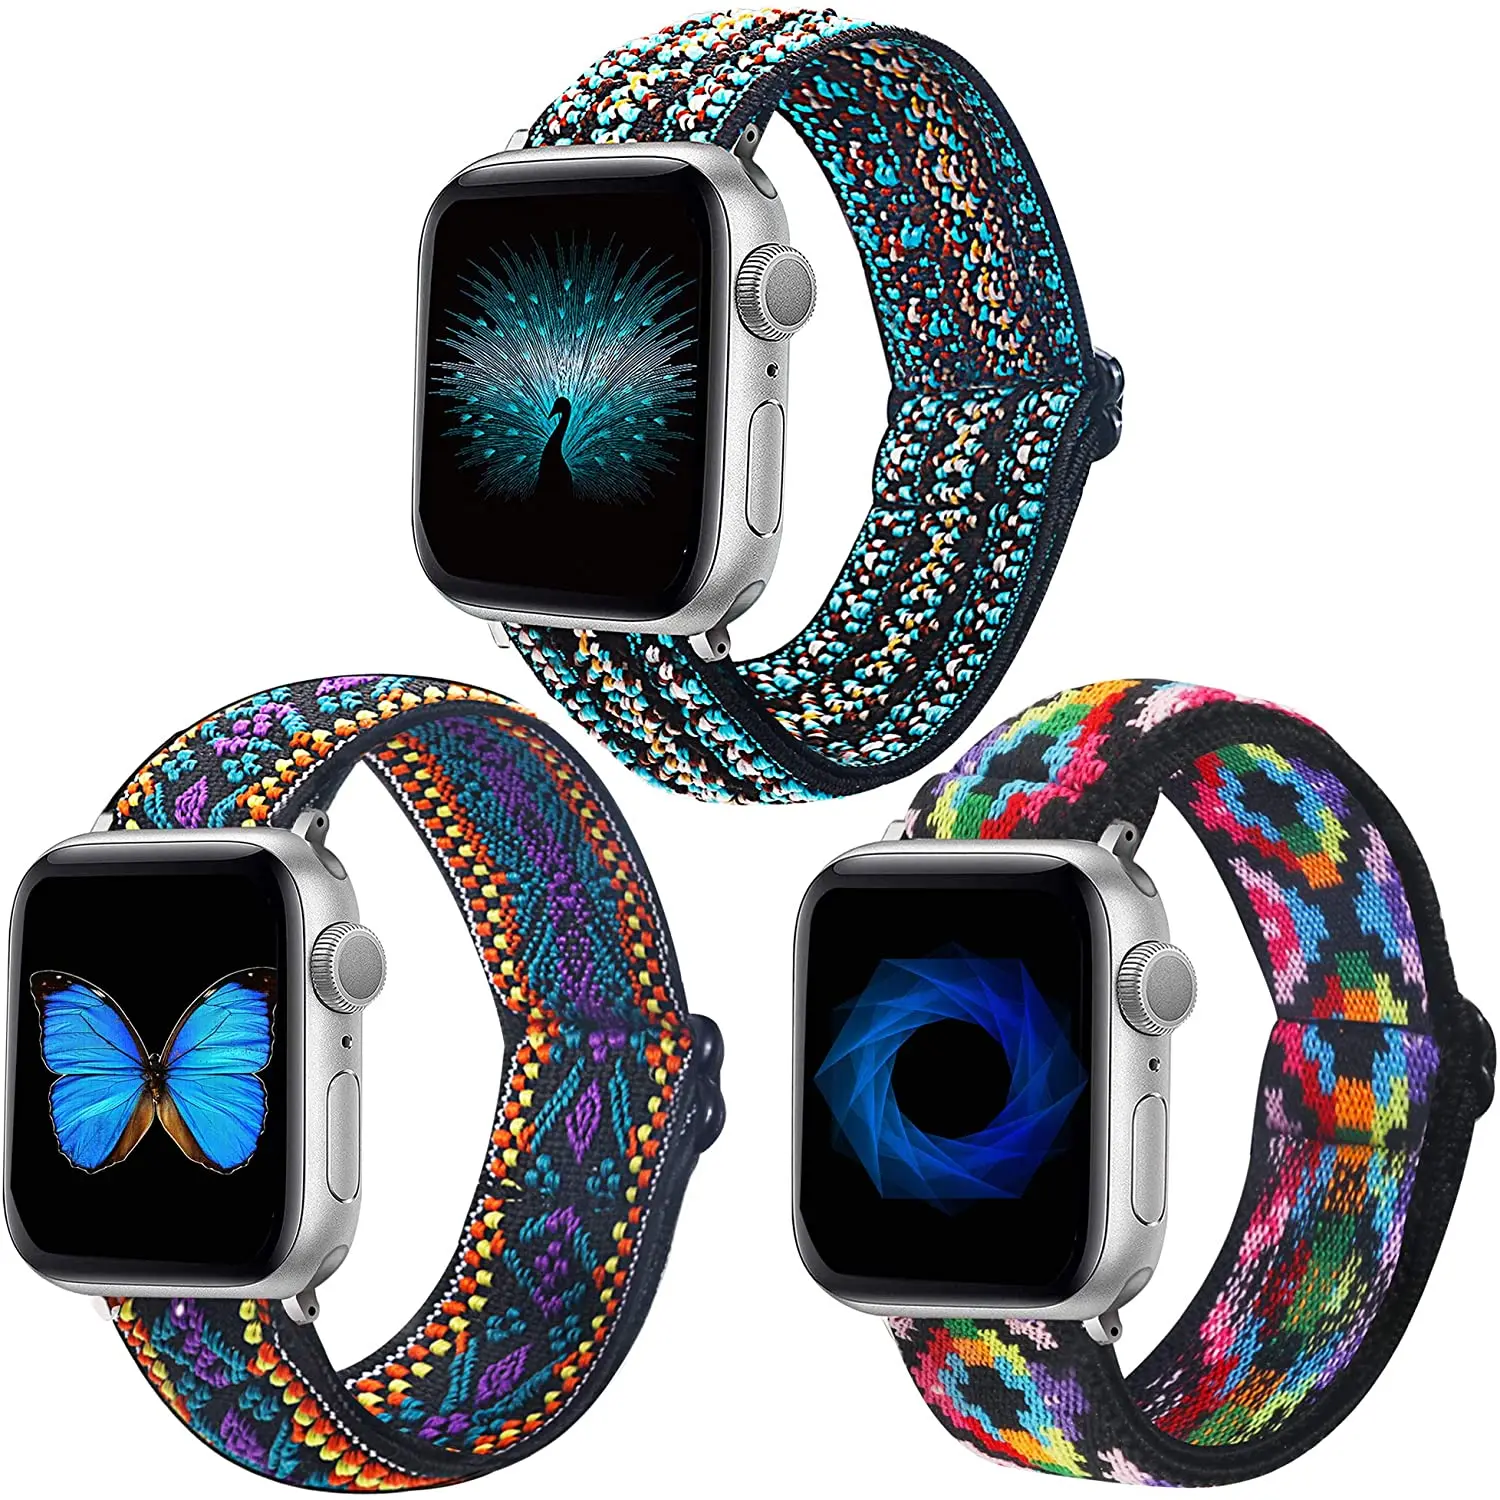 

2022 New apple watch band elastic nylon braided solo loop band for apple watch and Silicone Iwatch strap for series 7 6